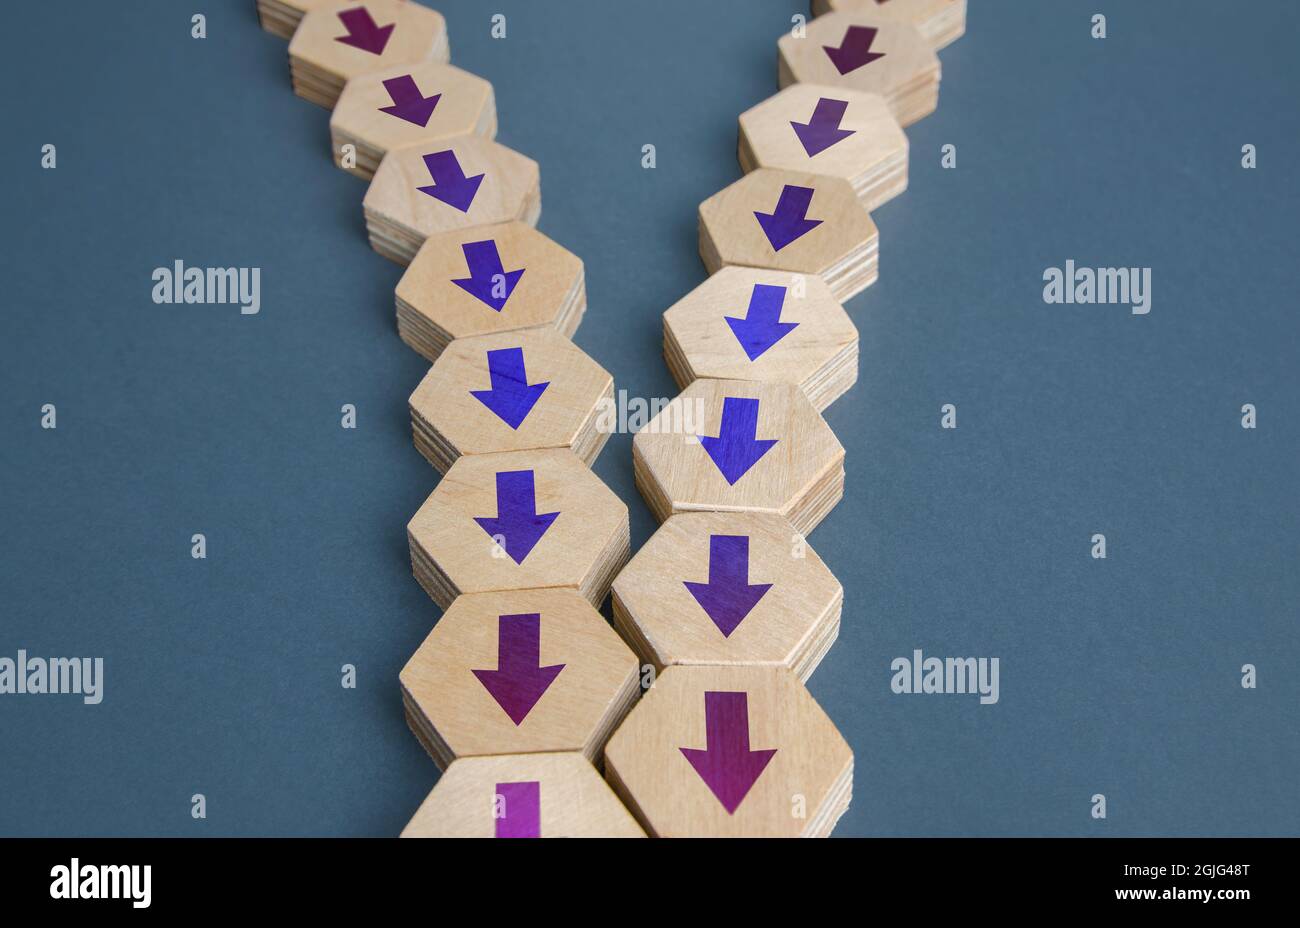 Arrow chains reunited into one. Integration acquisition. Consolidation, cooperation, organization. Merge. Pooling efforts, concentration resources. Sy Stock Photo